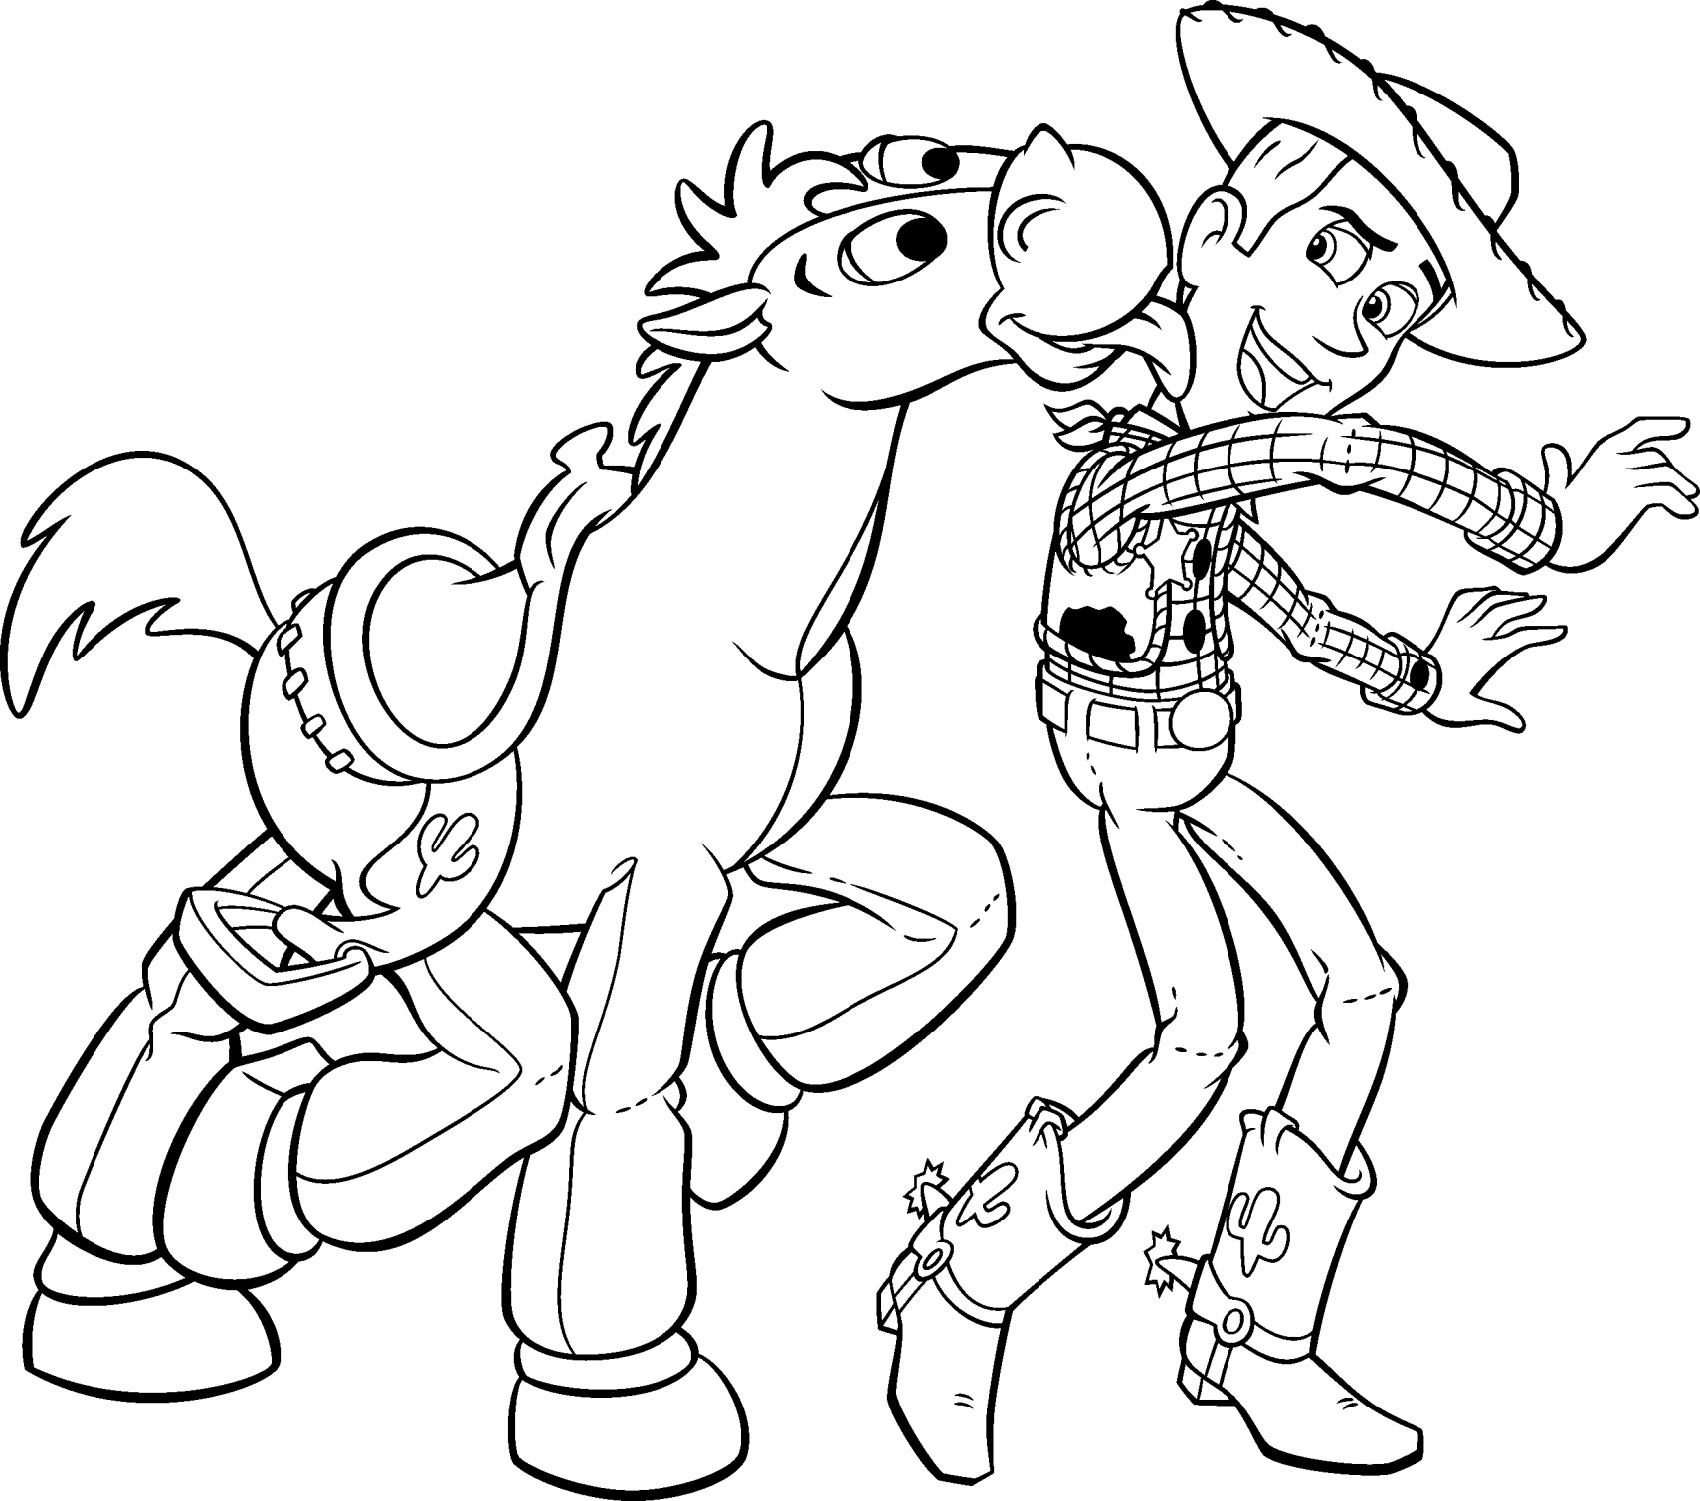 Disney-Printable-Coloring-Pages-Toy-Story